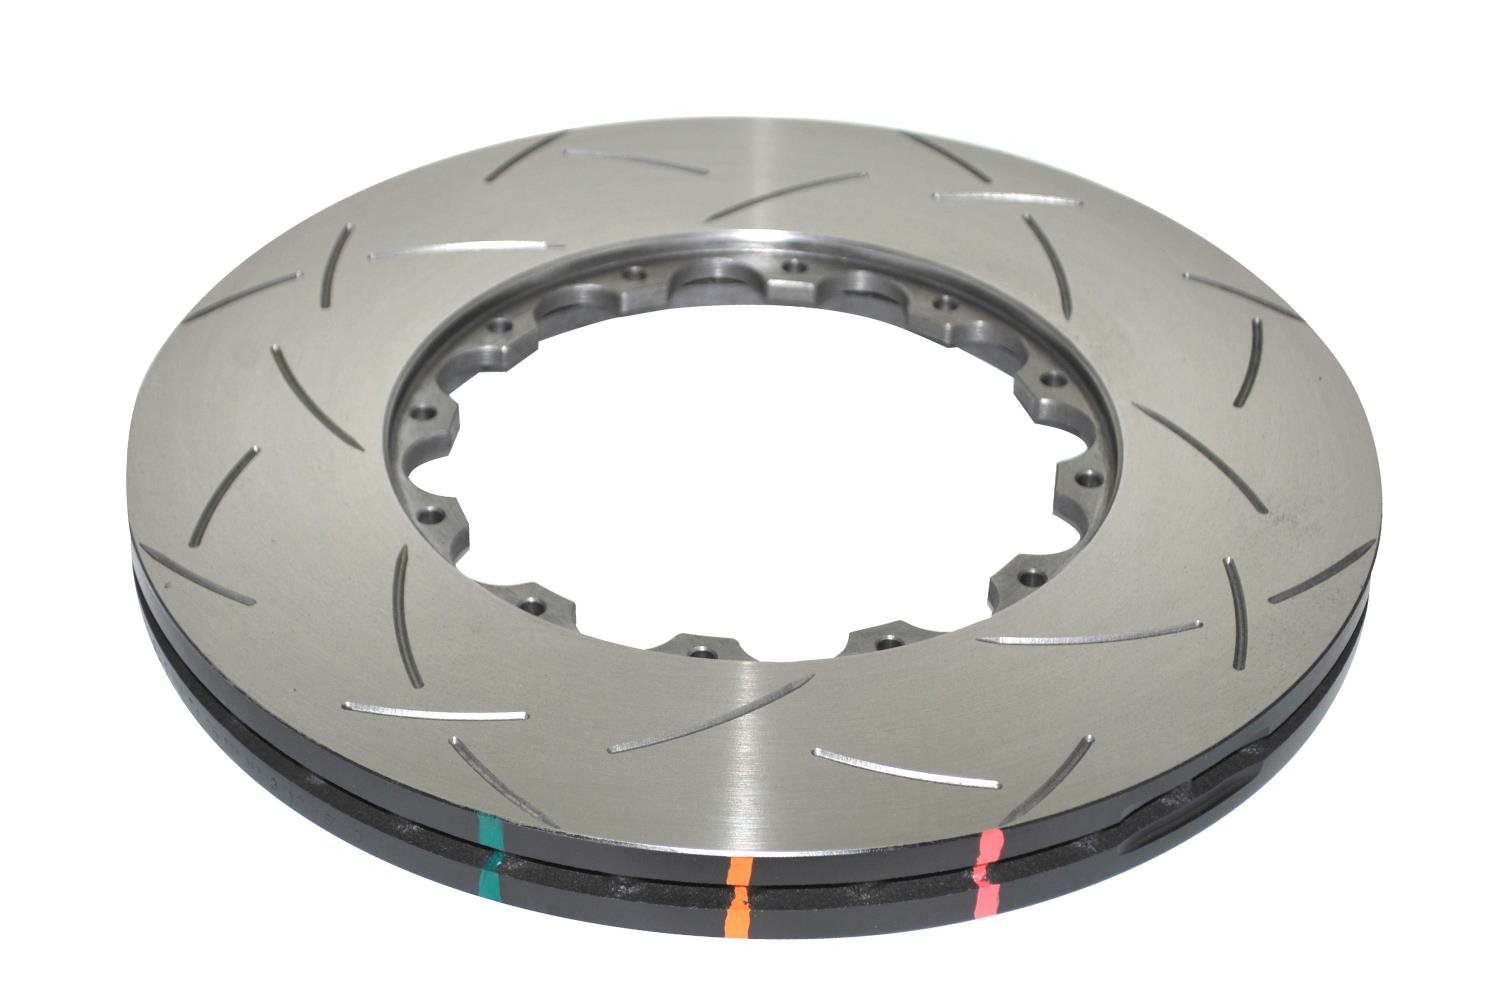 5000 Series T3 slotted Brake Disc Ring, 5000 Series Slotted Brake Rotor 355x32mm Brembo Replacement Ring, Left